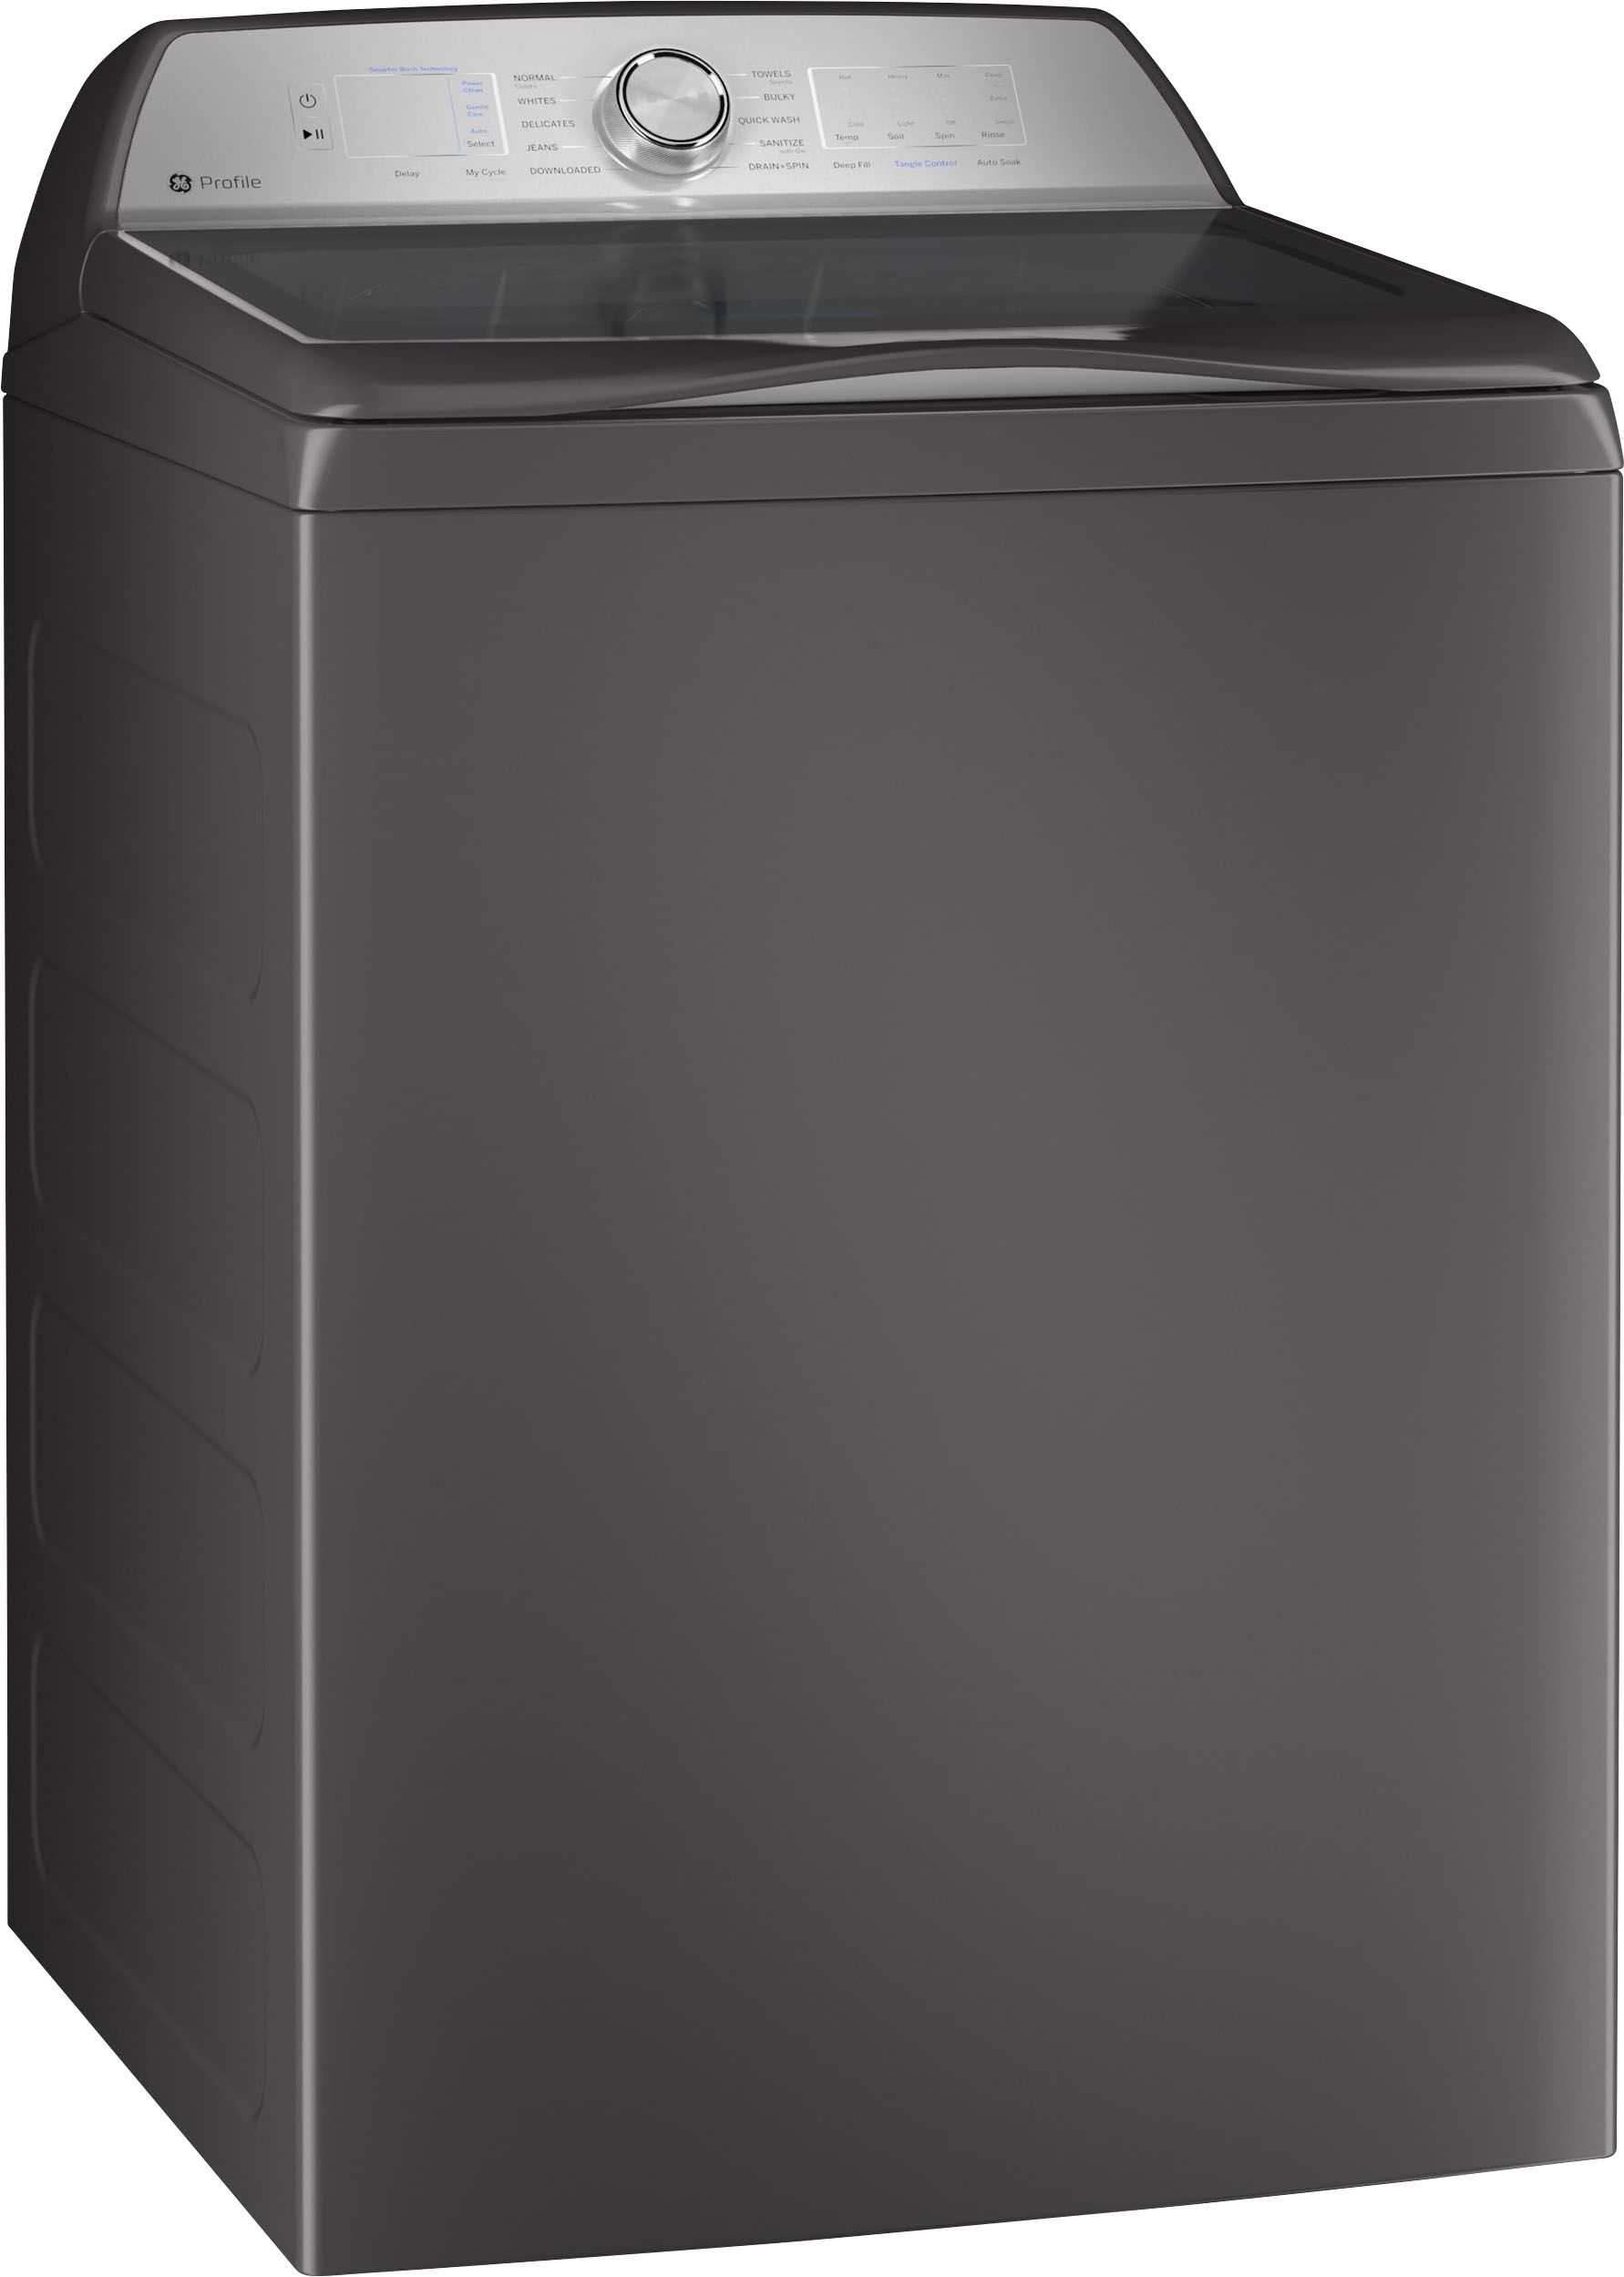 Angle View: GE Profile - 4.9 Cu Ft High Efficiency Smart Top Load Washer with Smarter Wash Technology, Easier Reach & Microban Technology - Diamond Gray